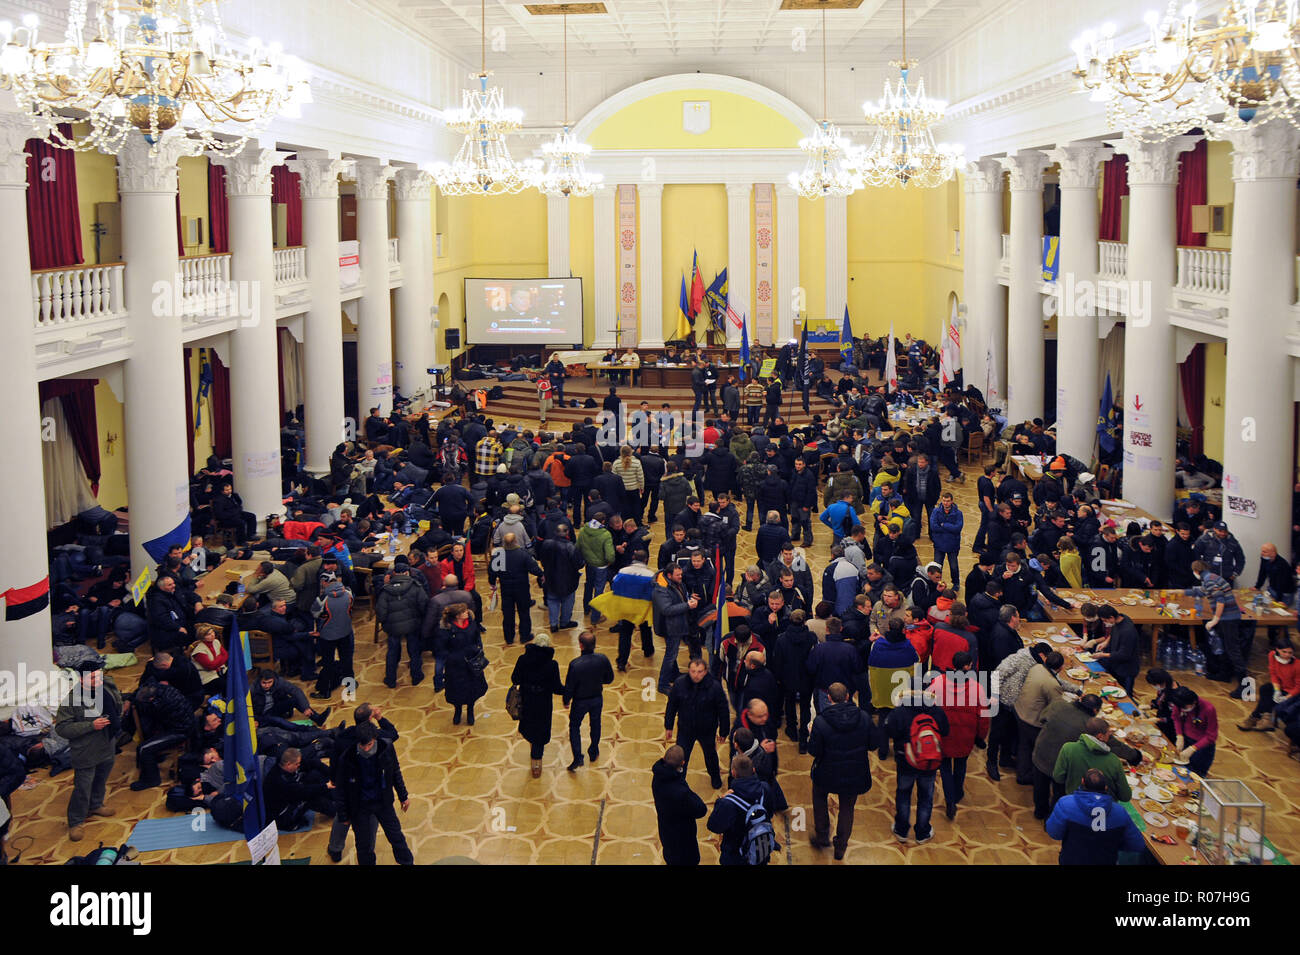 nobody rocket owner December 3, 2013 - Kiev, Ukraine: Protesters occupy the Kiev City Hall to  protest their government's rejection of a historic trade deal with the  European Union. The occupied City Hall quickly turned